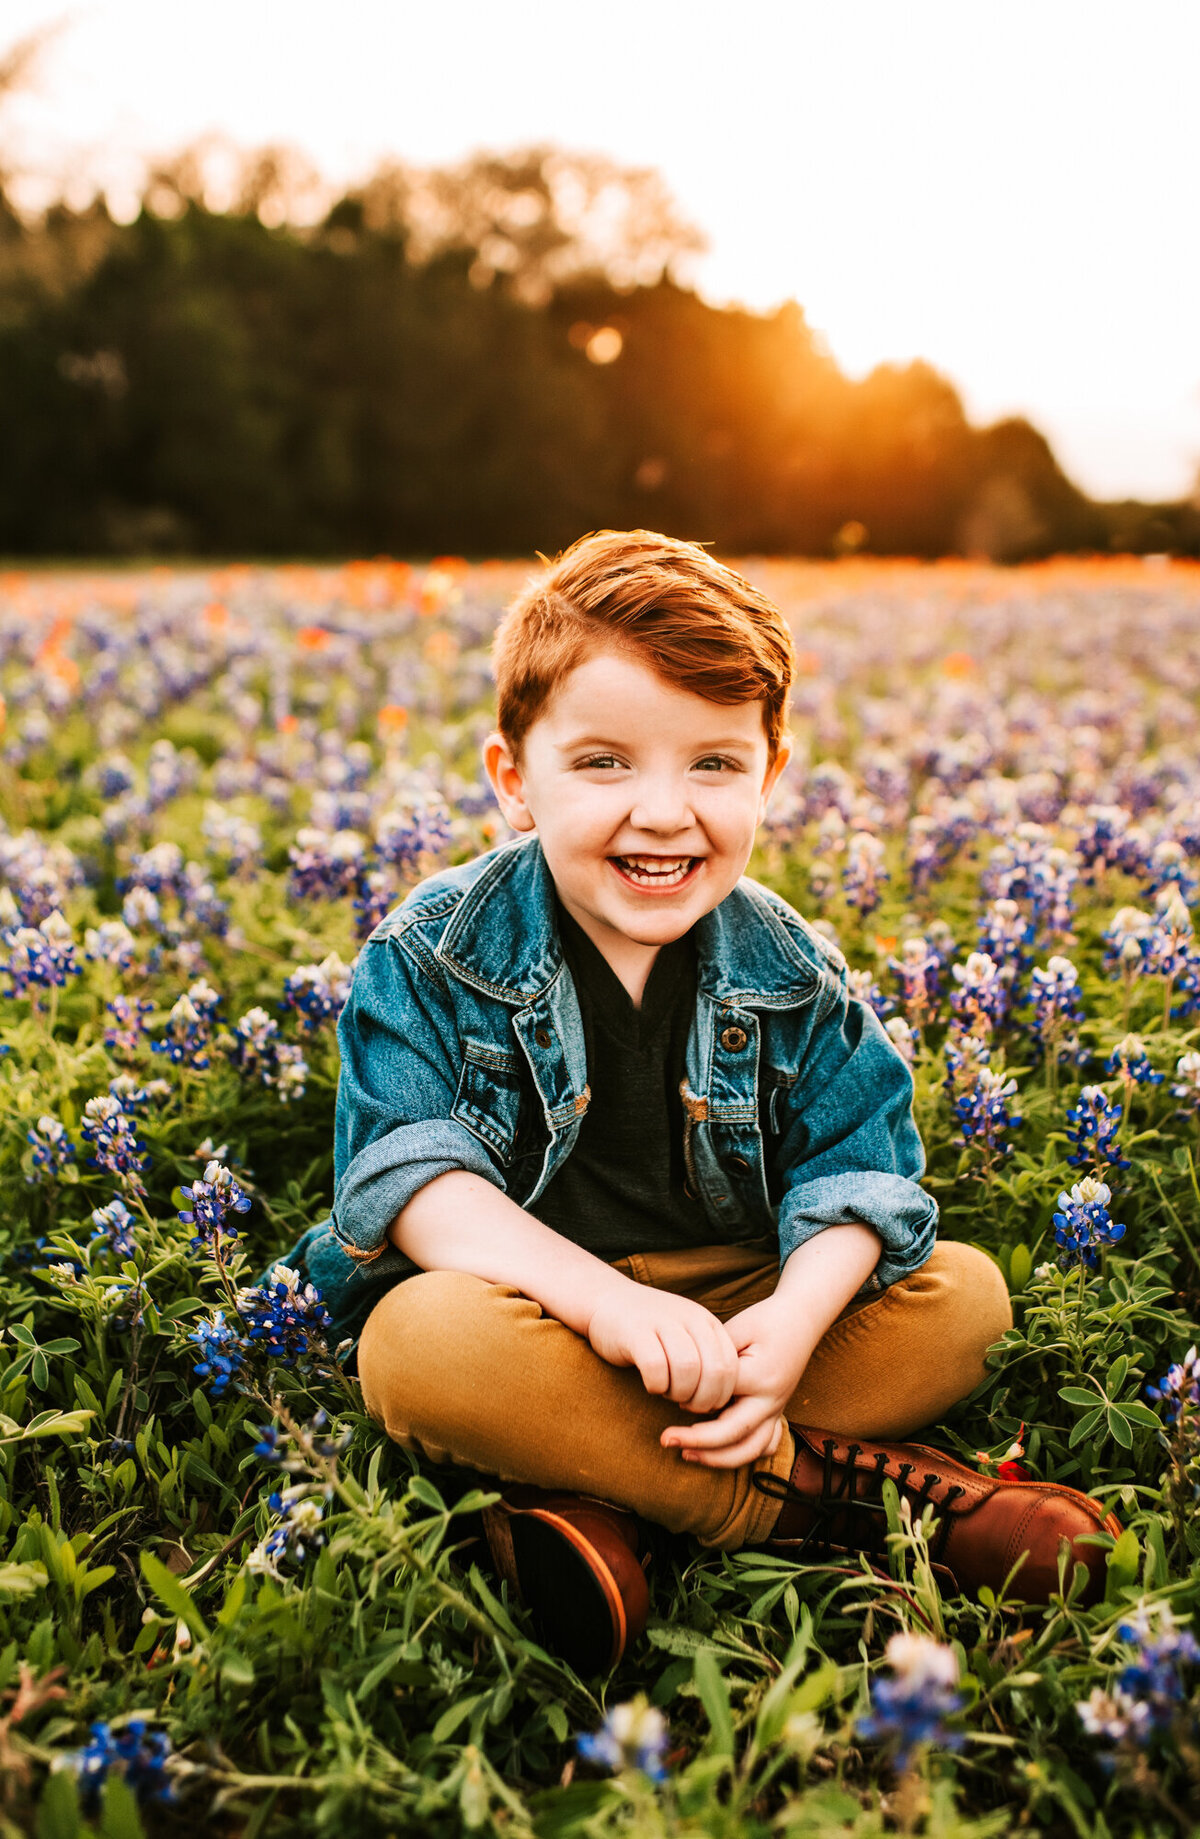 Family Photographer, Little boy in a jean jacket sitting in a field of bluebonnets at sunset.